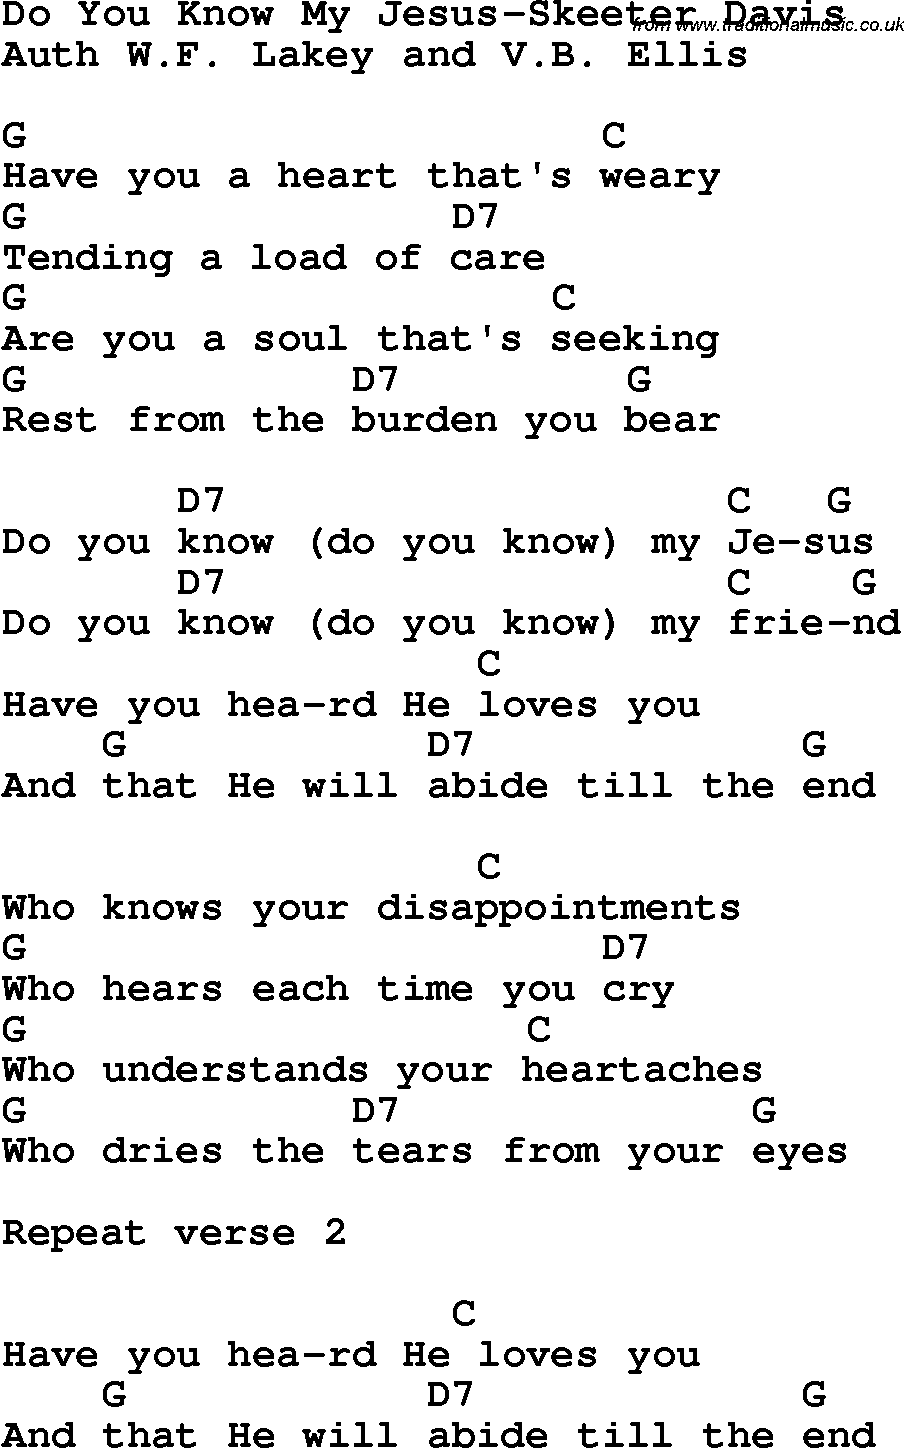 Country, Southern and Bluegrass Gospel Song Do You Know My Jesus-Skeeter Davis lyrics and chords